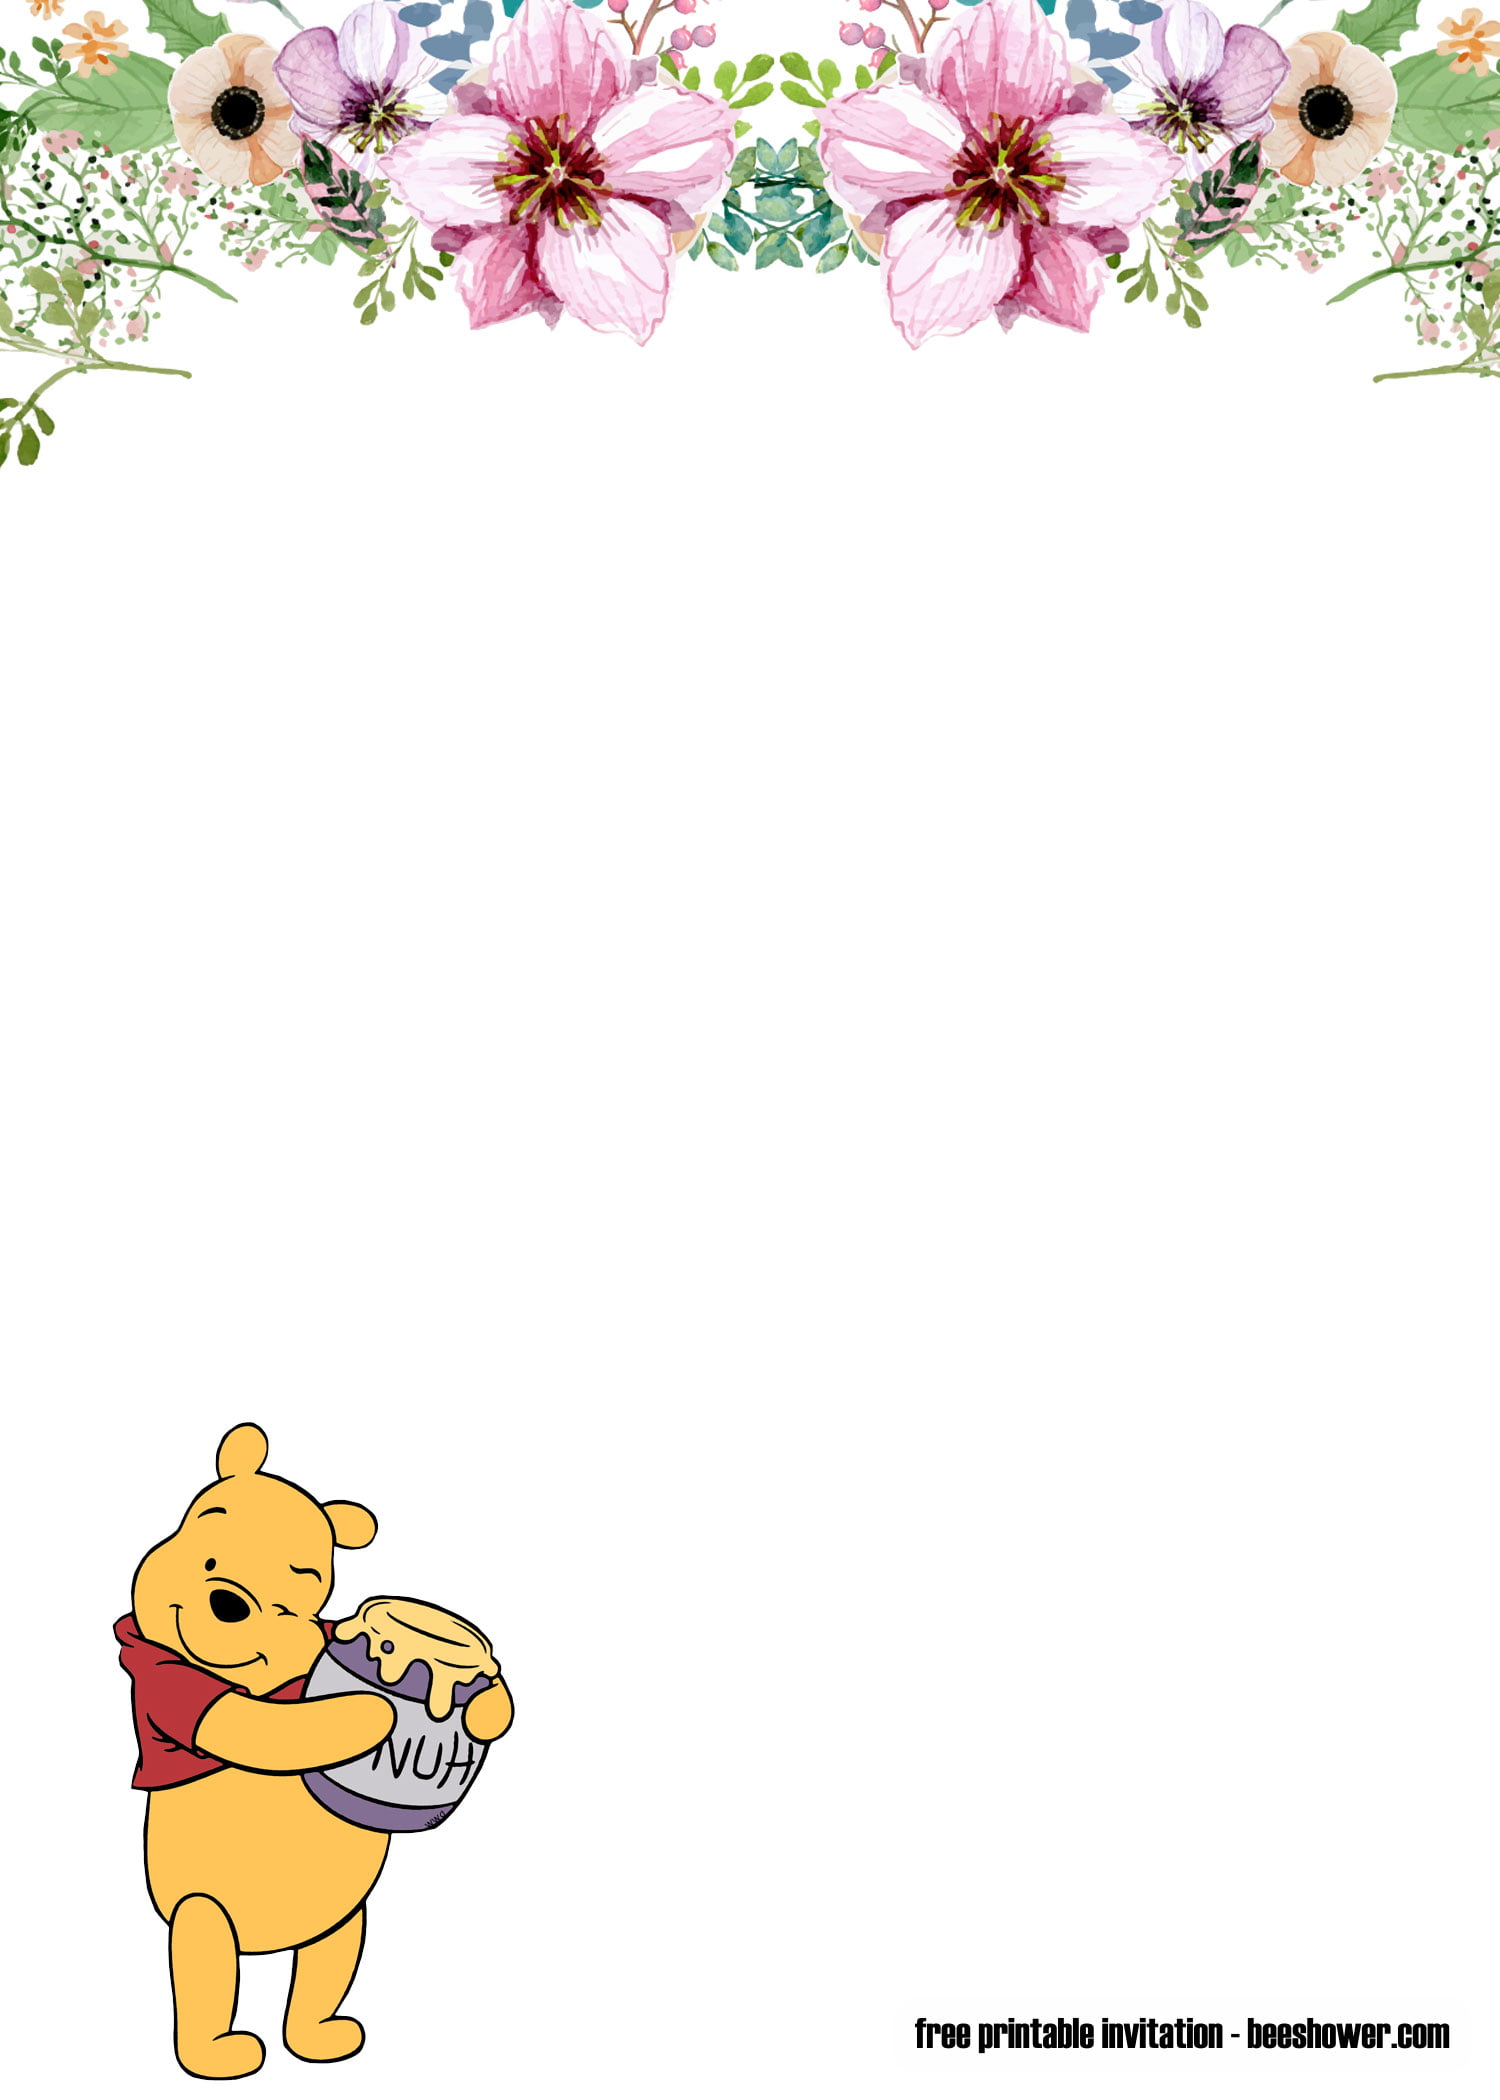 FREE Classic Winnie the Pooh Baby Shower Invitations FREE Printable